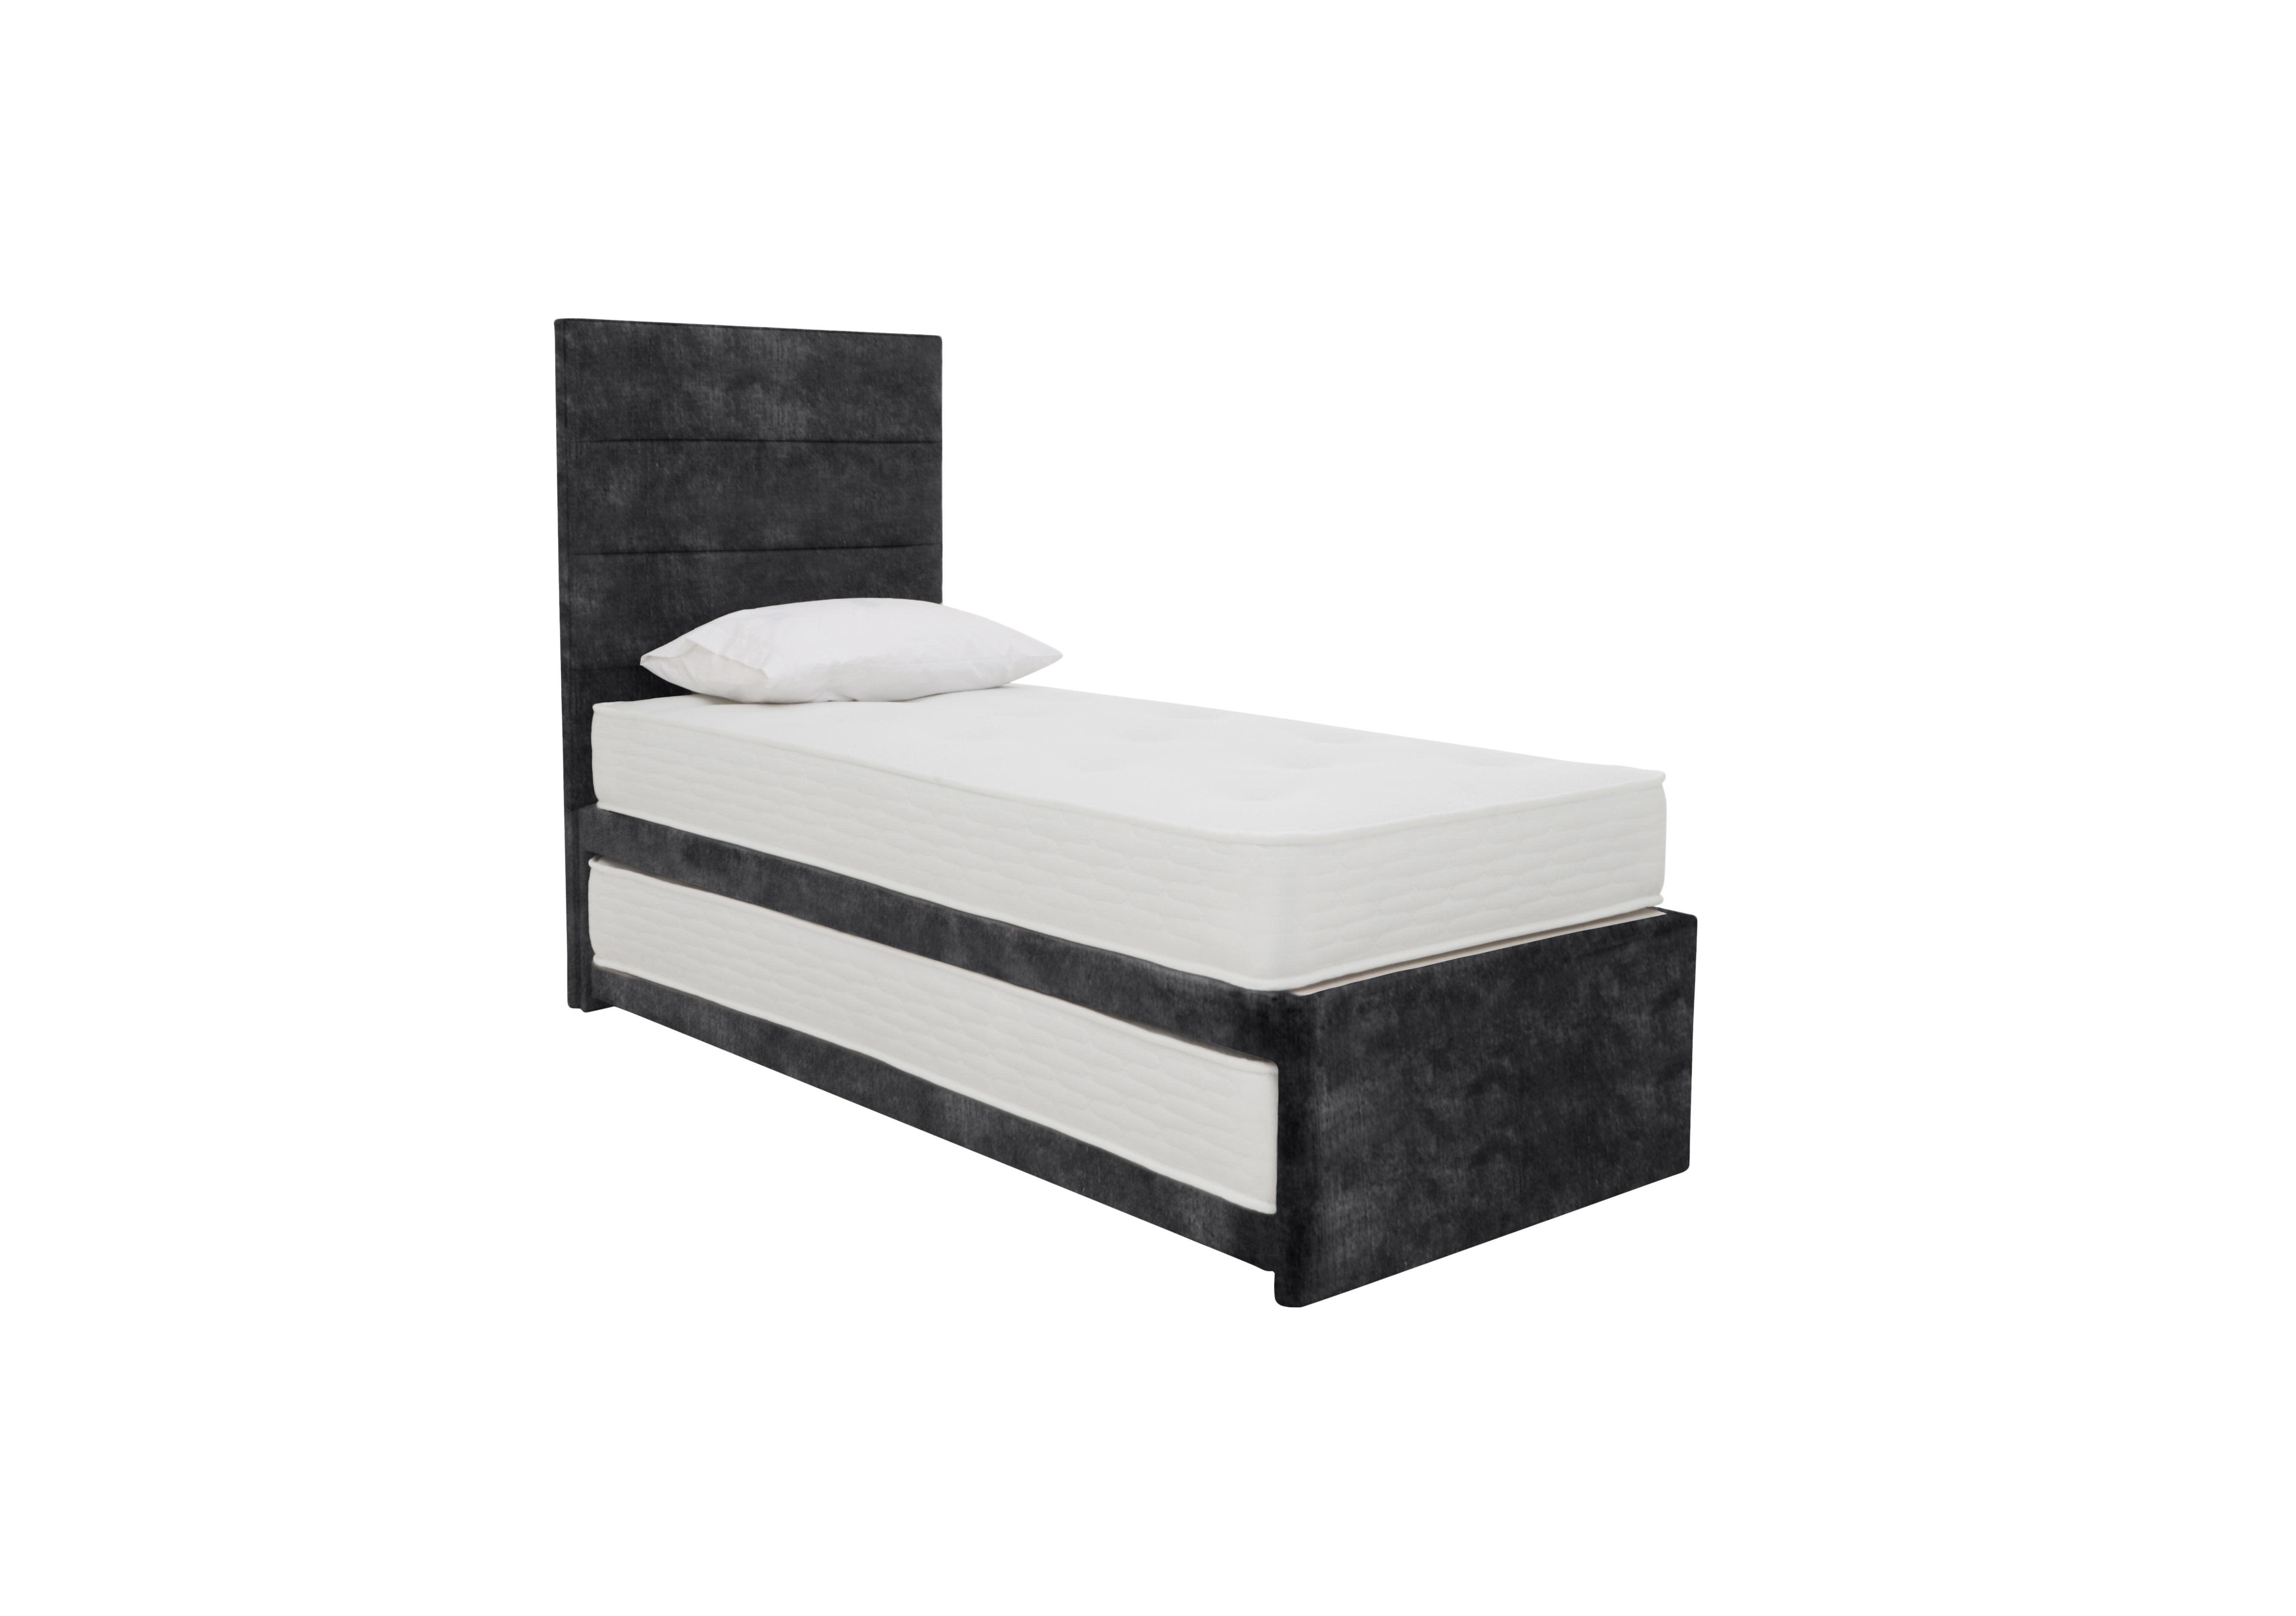 Guest Bed with Pocket Sprung Mattress in Lace Domino on Furniture Village